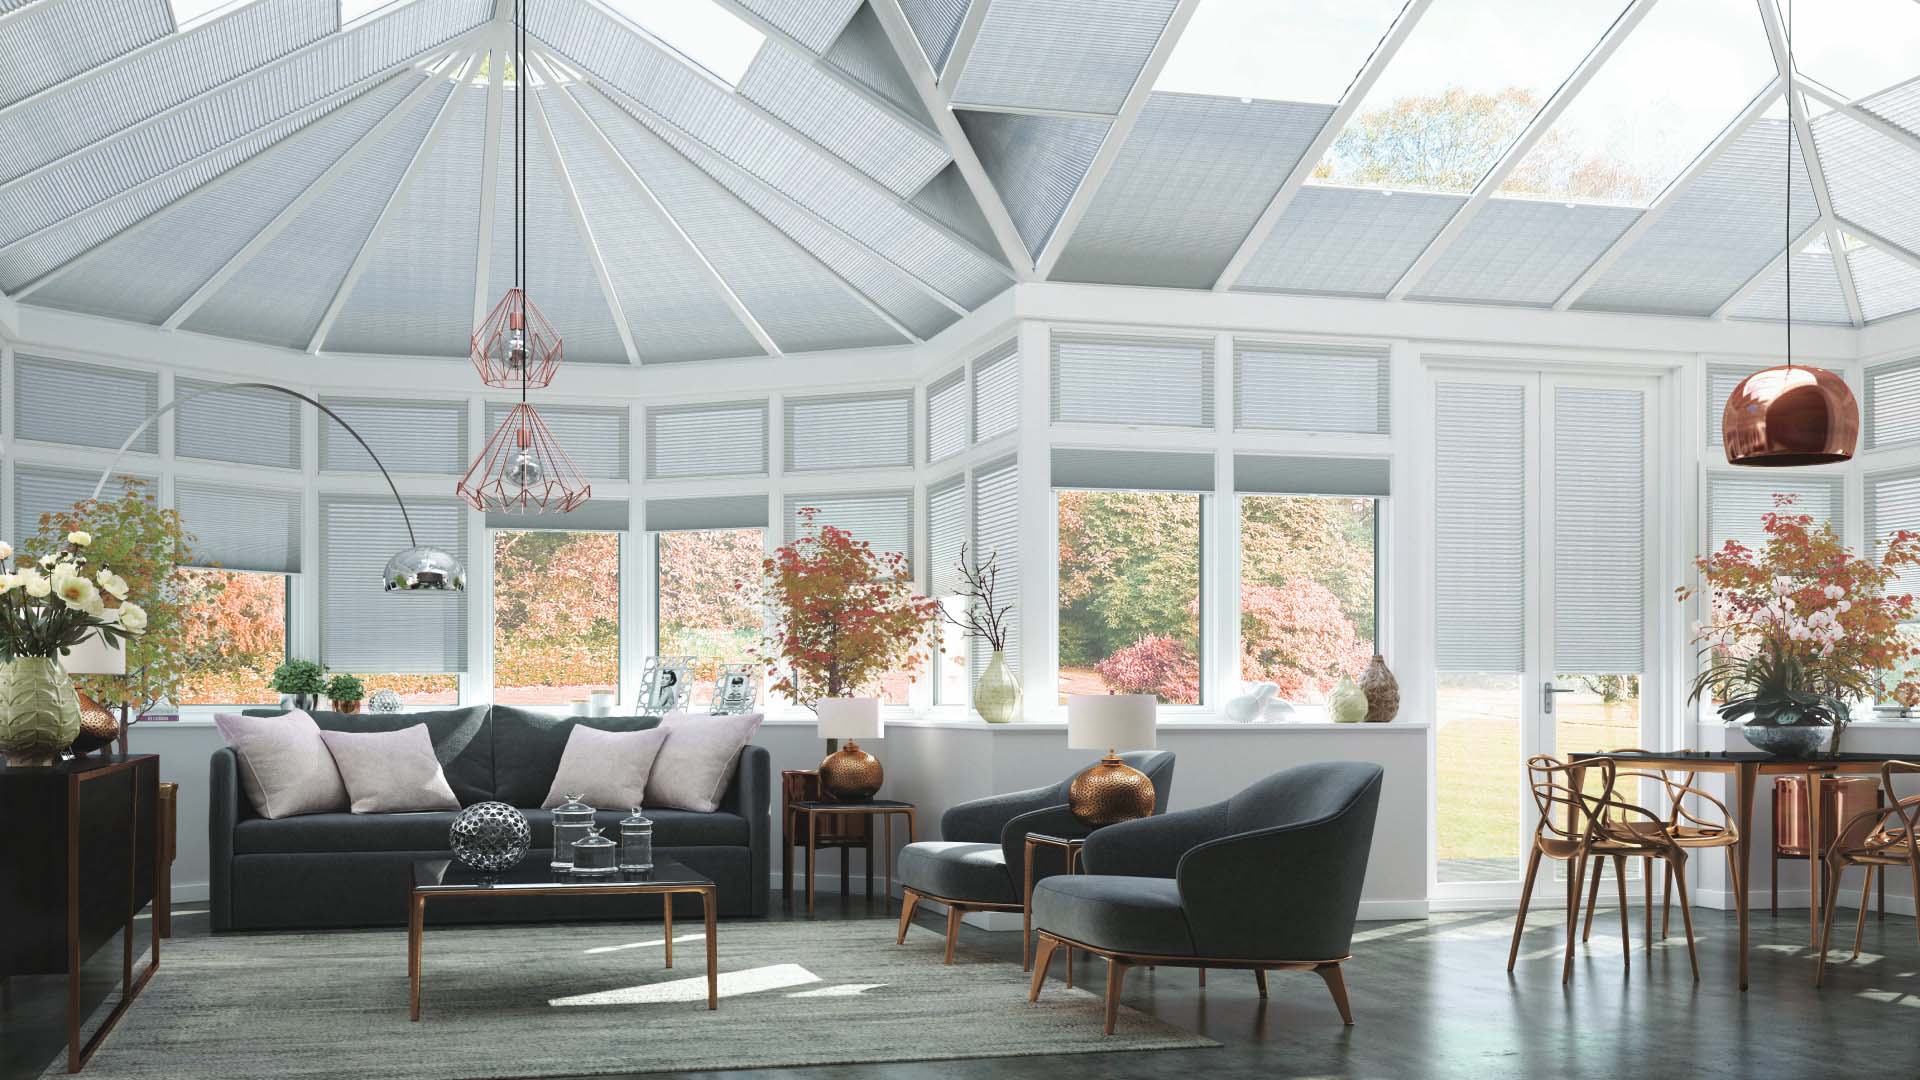 Image of a large conservatory